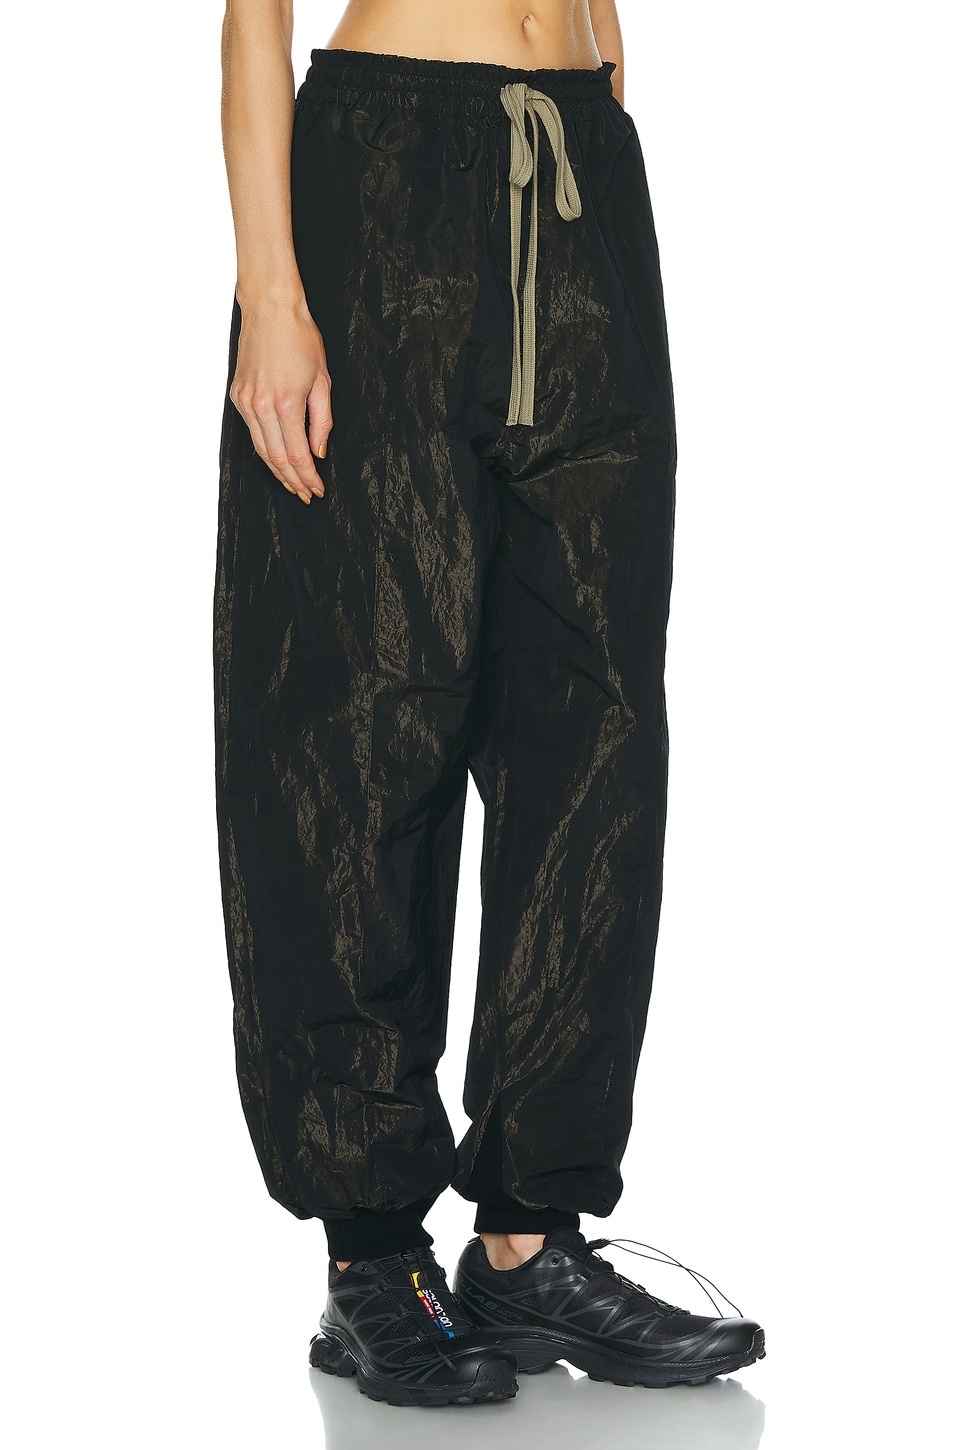 Wrinkled Polyester Pintuck Sweatpant - 2